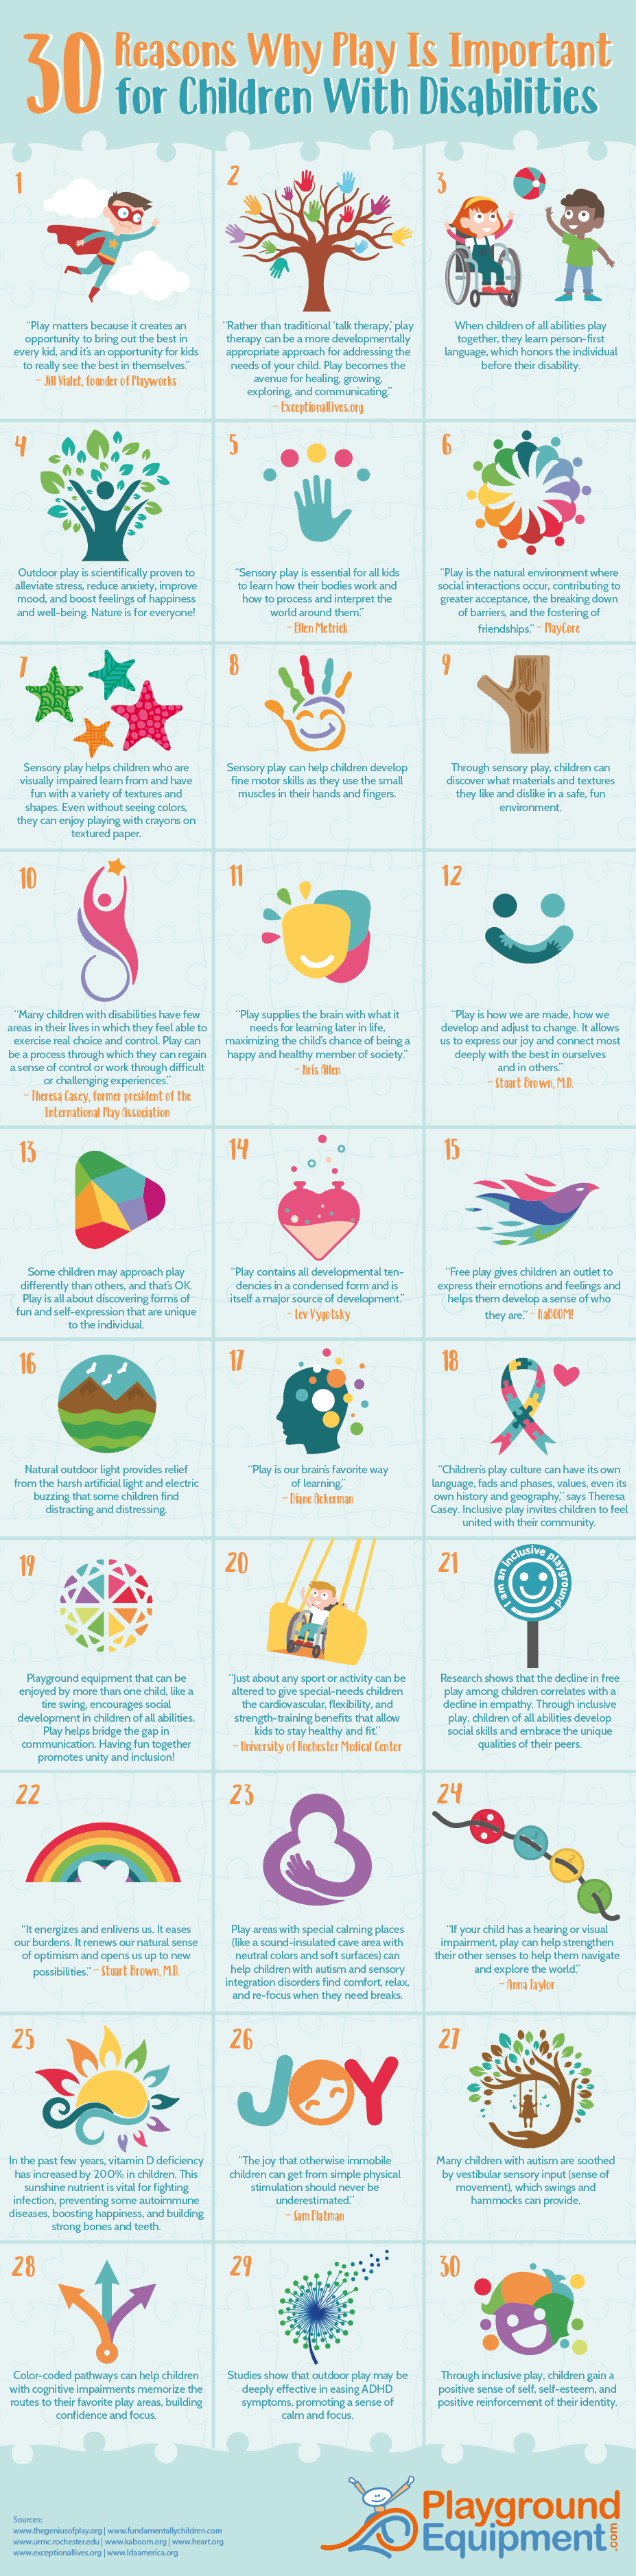 30 Reasons Why Play is Important for Children With Disabilities - PlaygroundEquipment.com - Infographic